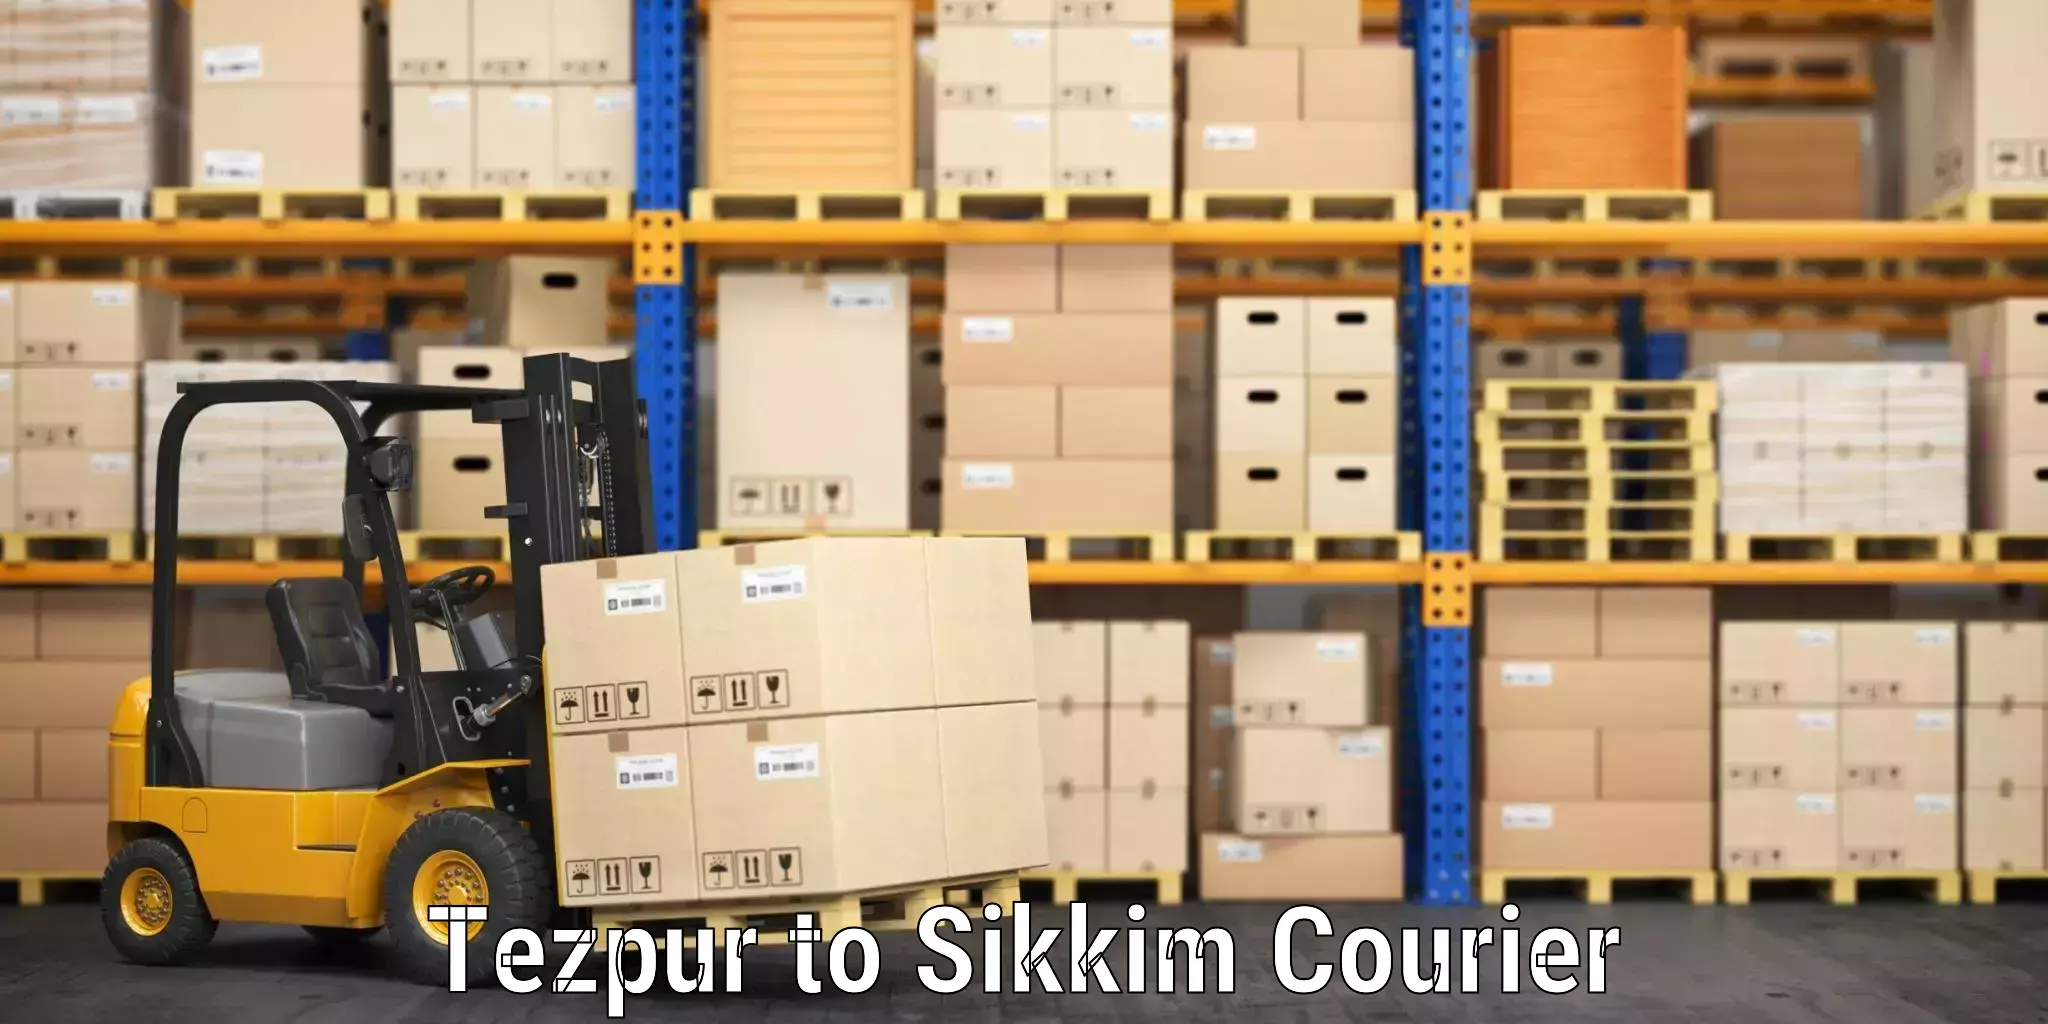 Luggage shipment processing Tezpur to North Sikkim